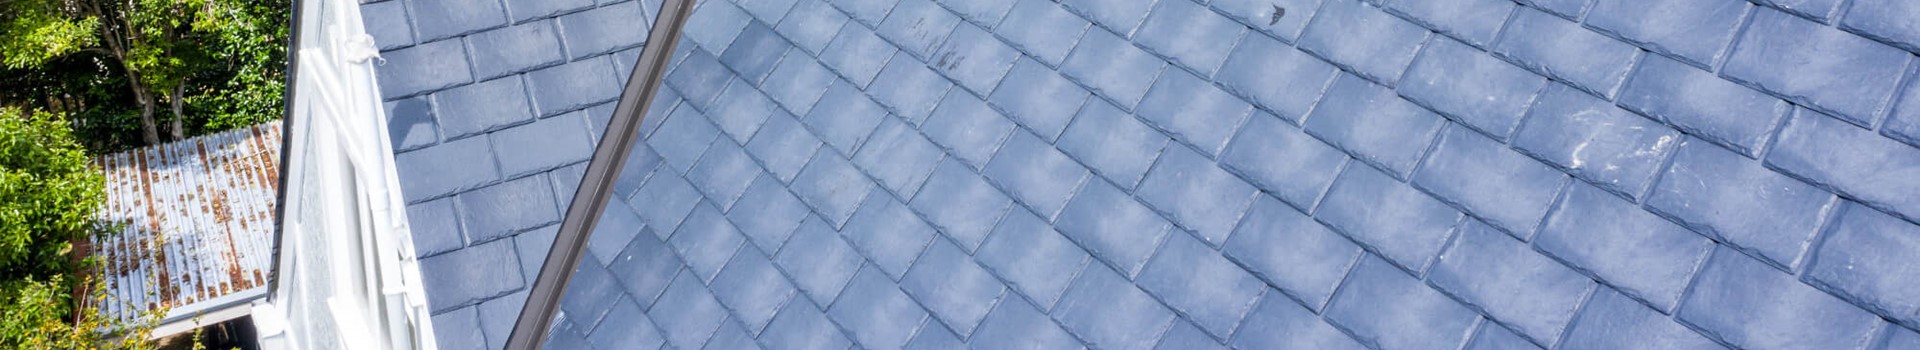 A sustainable alternative to slate roofing that doesn’t compromise aesthetics